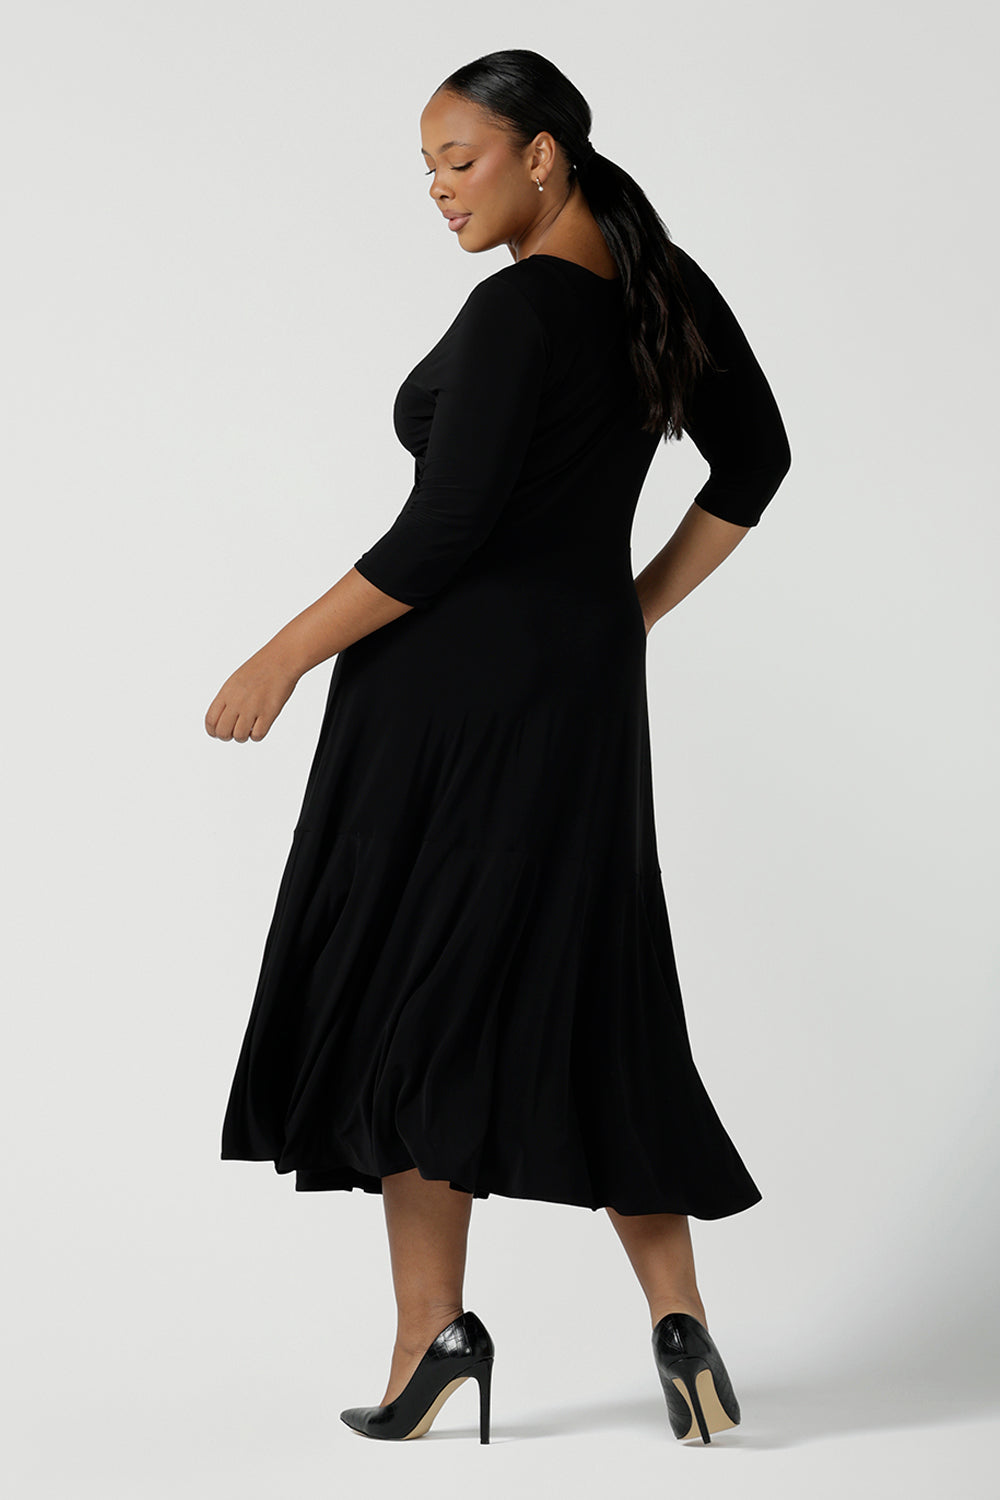 Back view of a size 16 woman wears a black reversible Bettina dress in black. V-neck style with pockets and midi length. Made in Australia for women size 8 - 24.